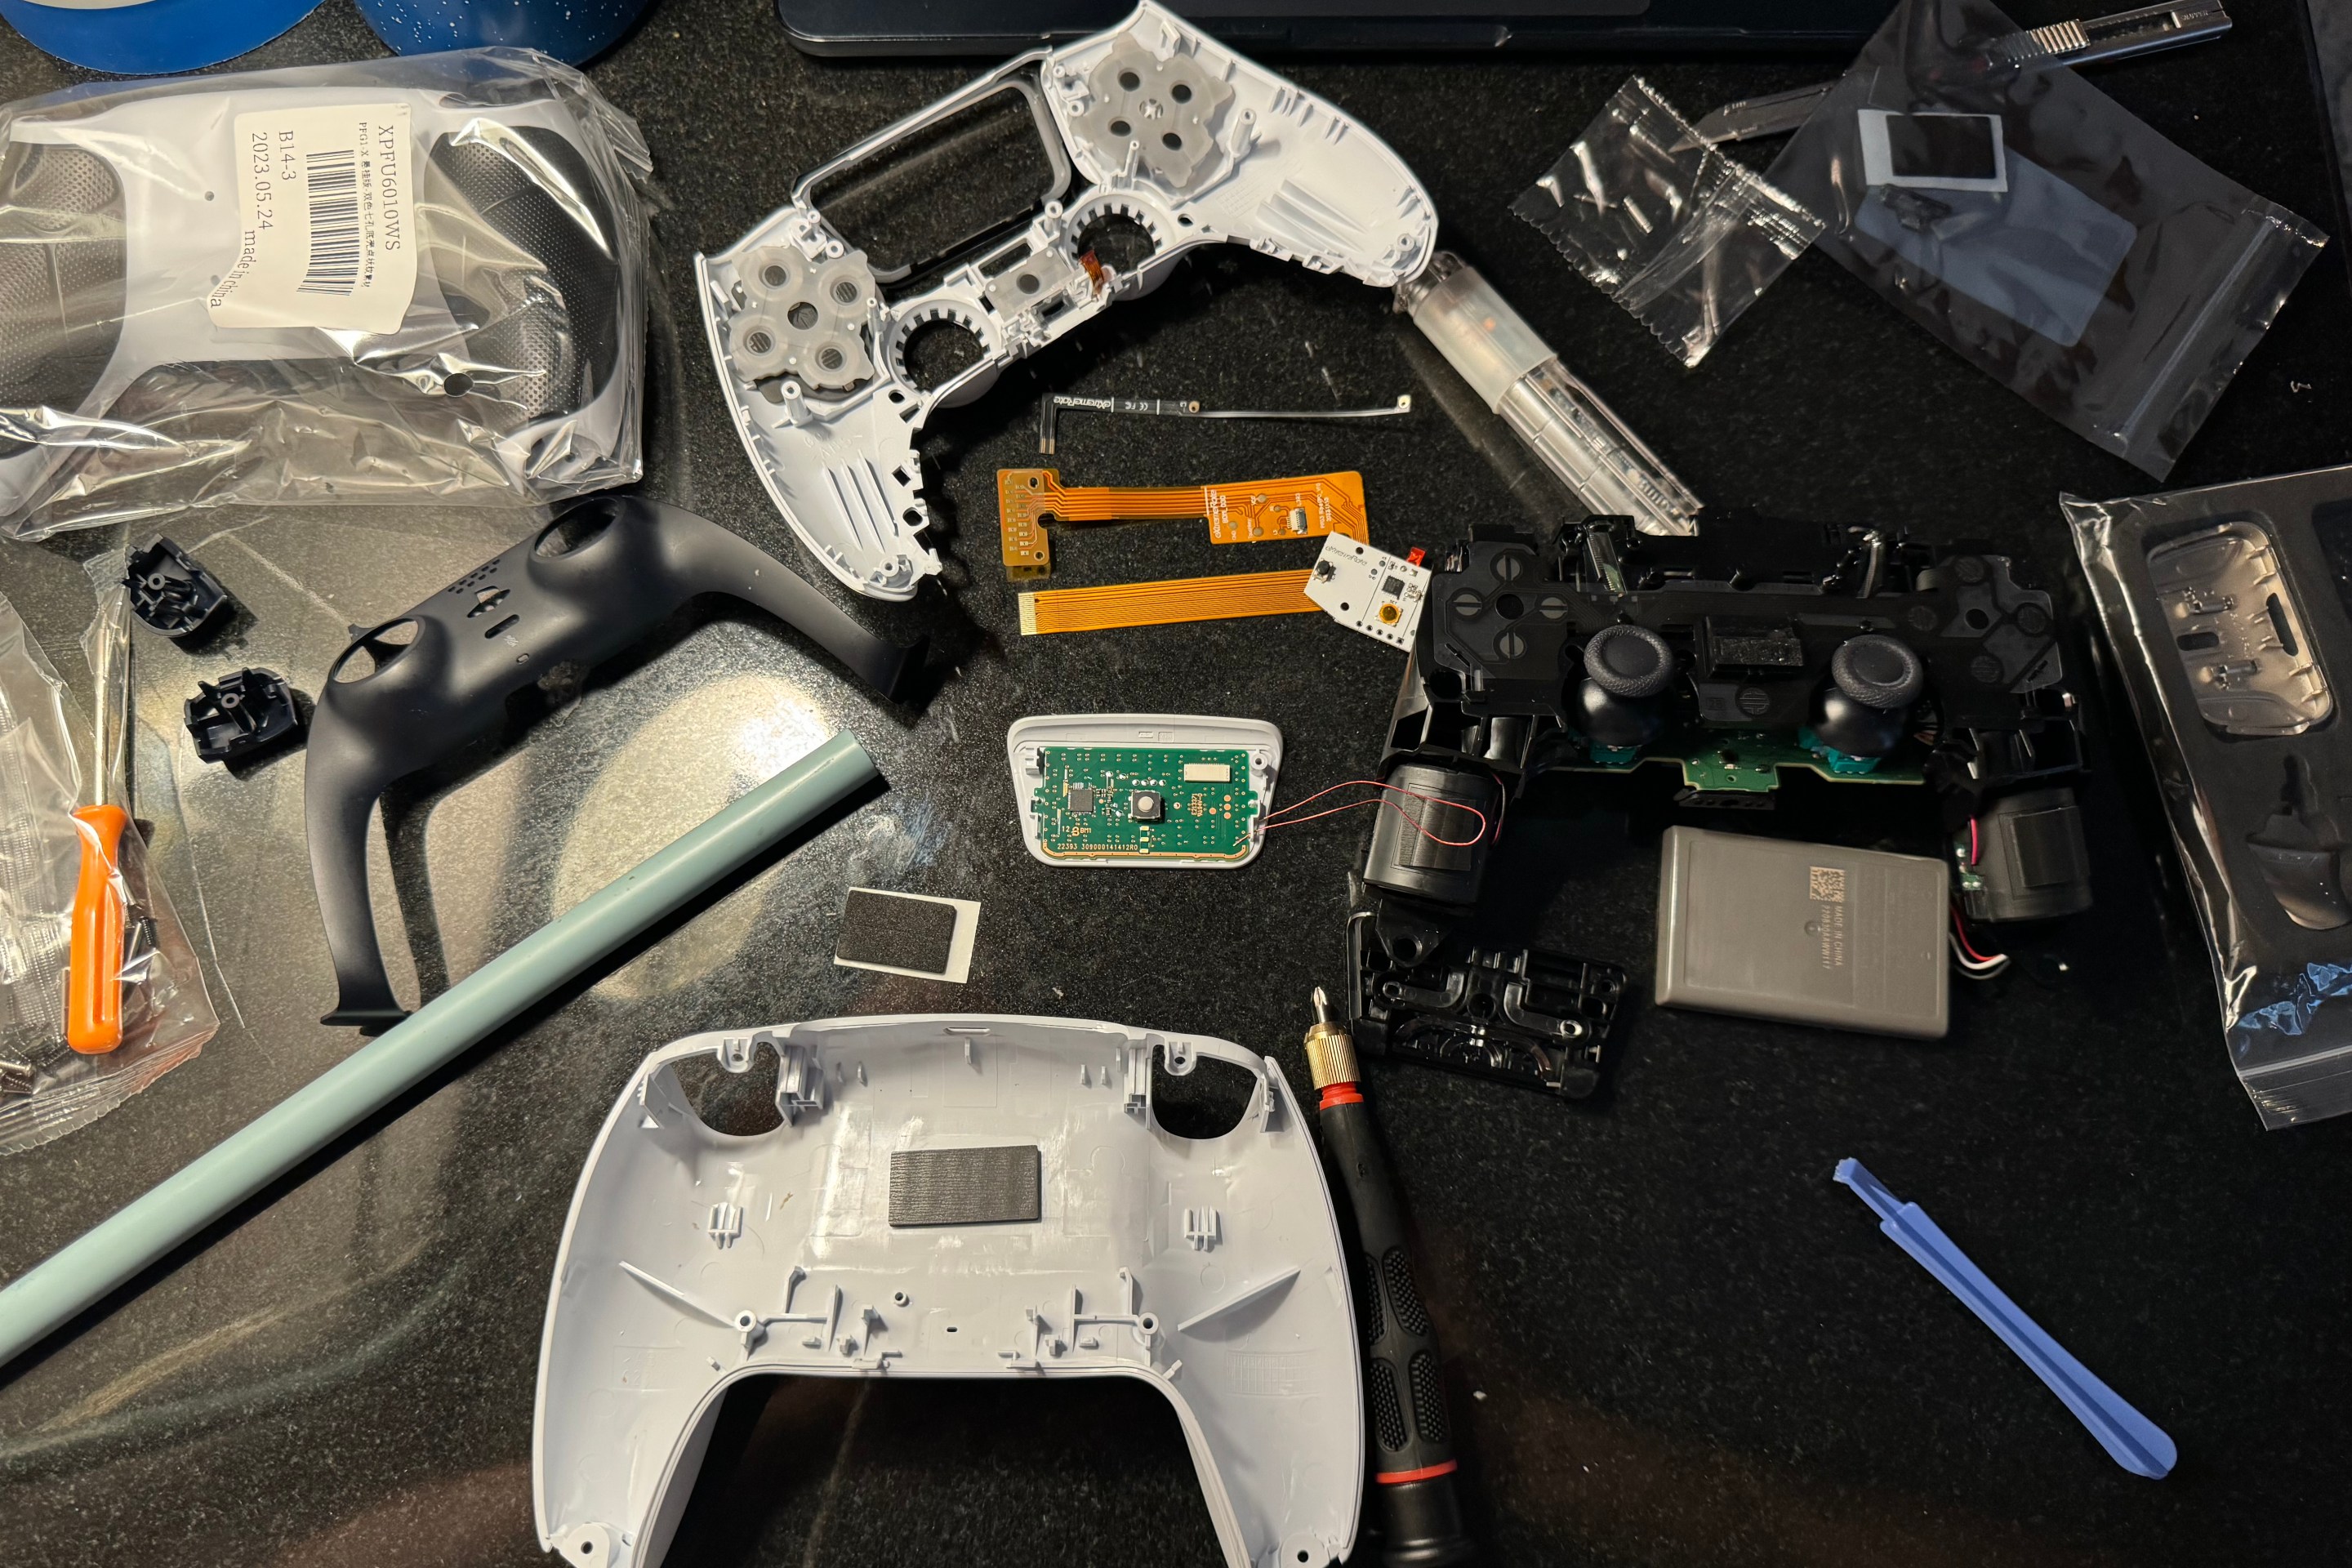 A DualSense controller laid out on a table mid-mod next to a soldering iron and small screwdriver.